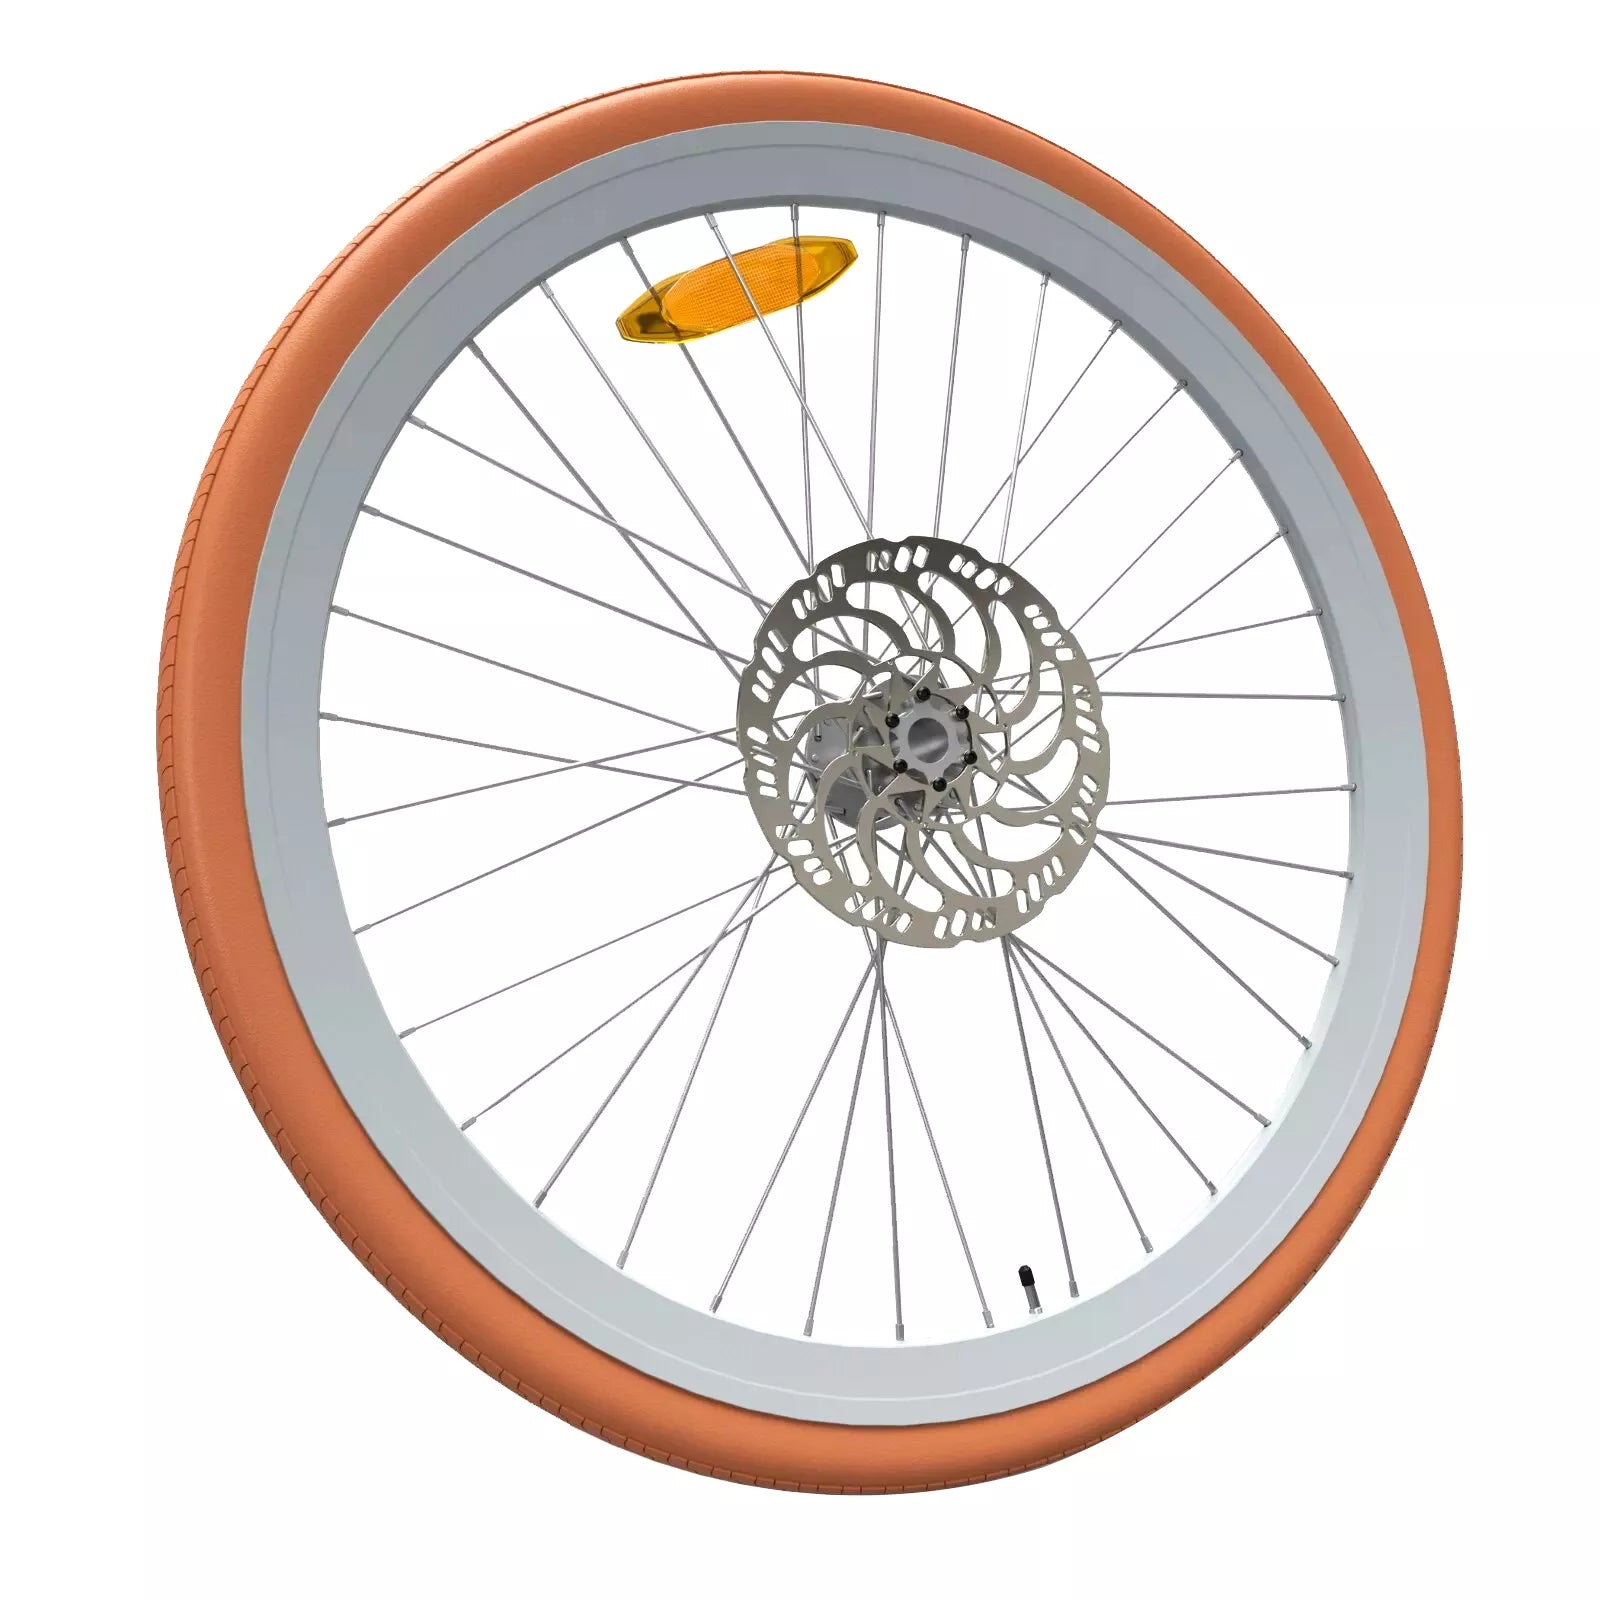  The eBike Front Wheel for City Vanture and Commuter models measures 28.3